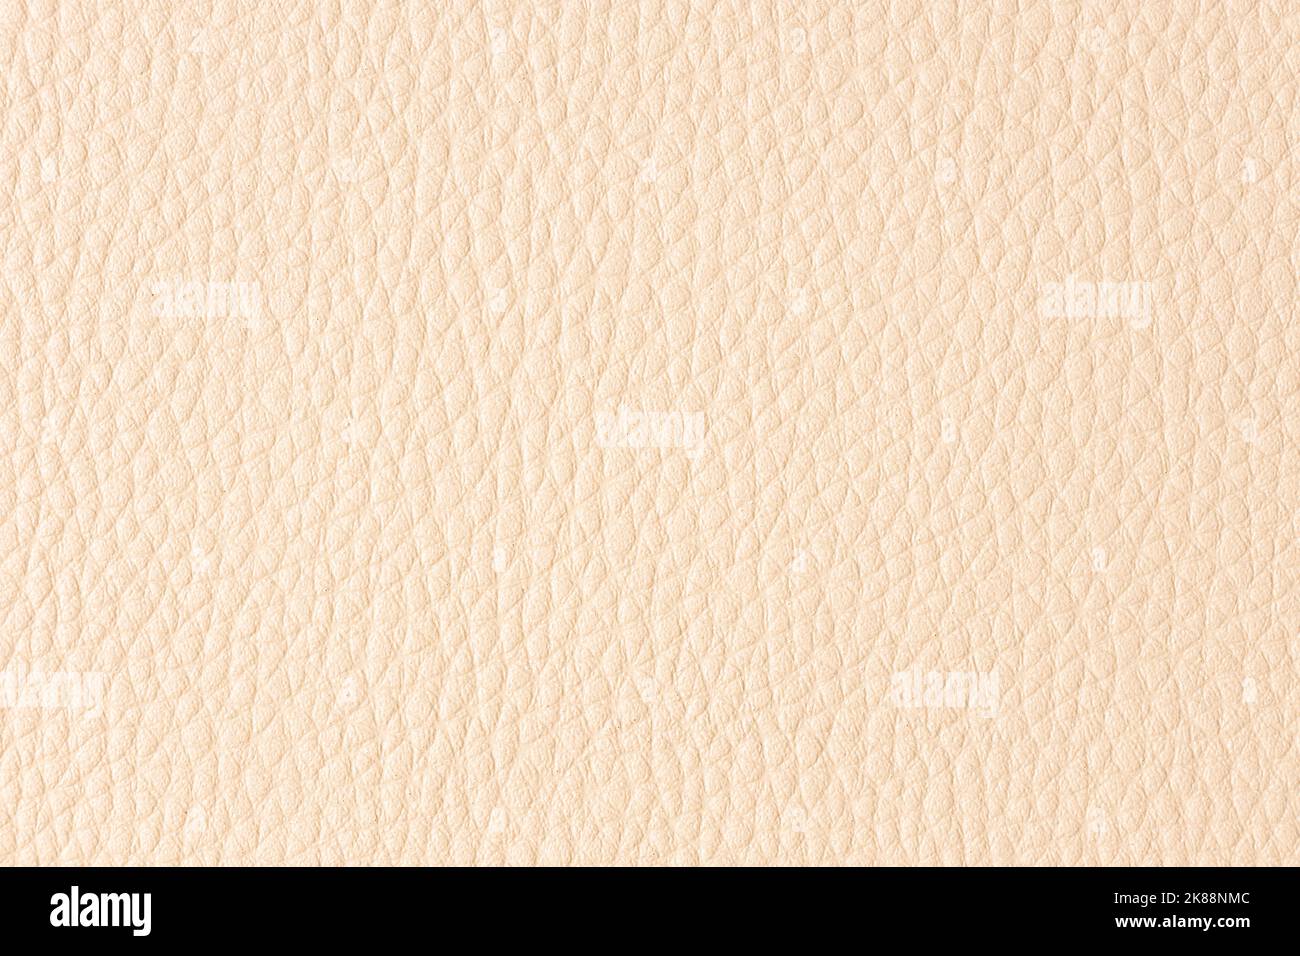 Beige Leather background texture. Full frame Stock Photo